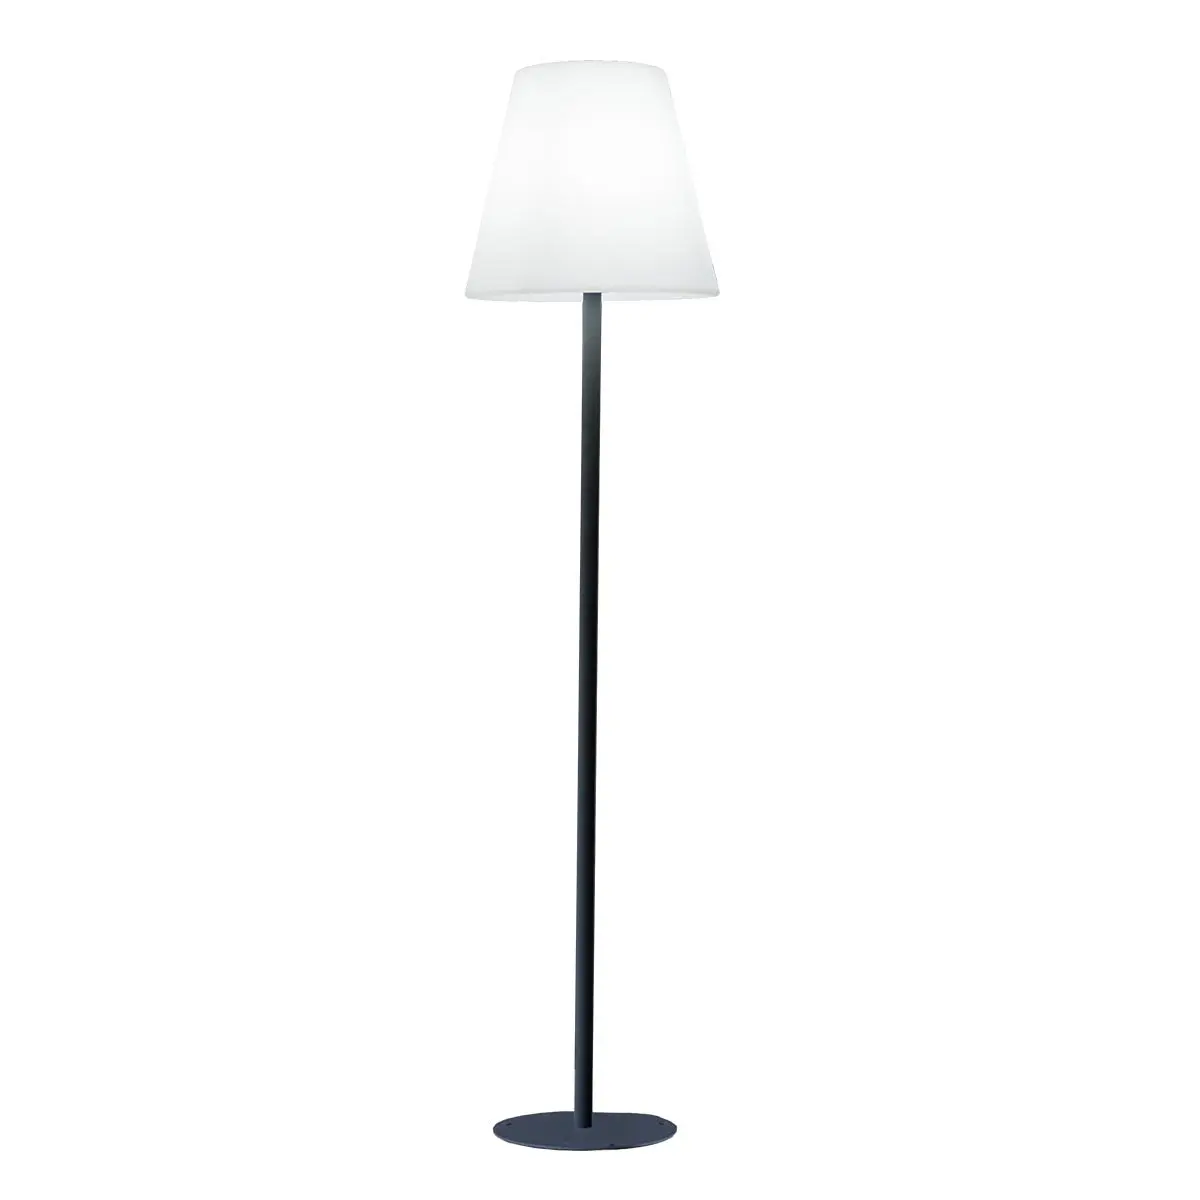 Kabellose dimmbare STANDY LED-Stehlampe